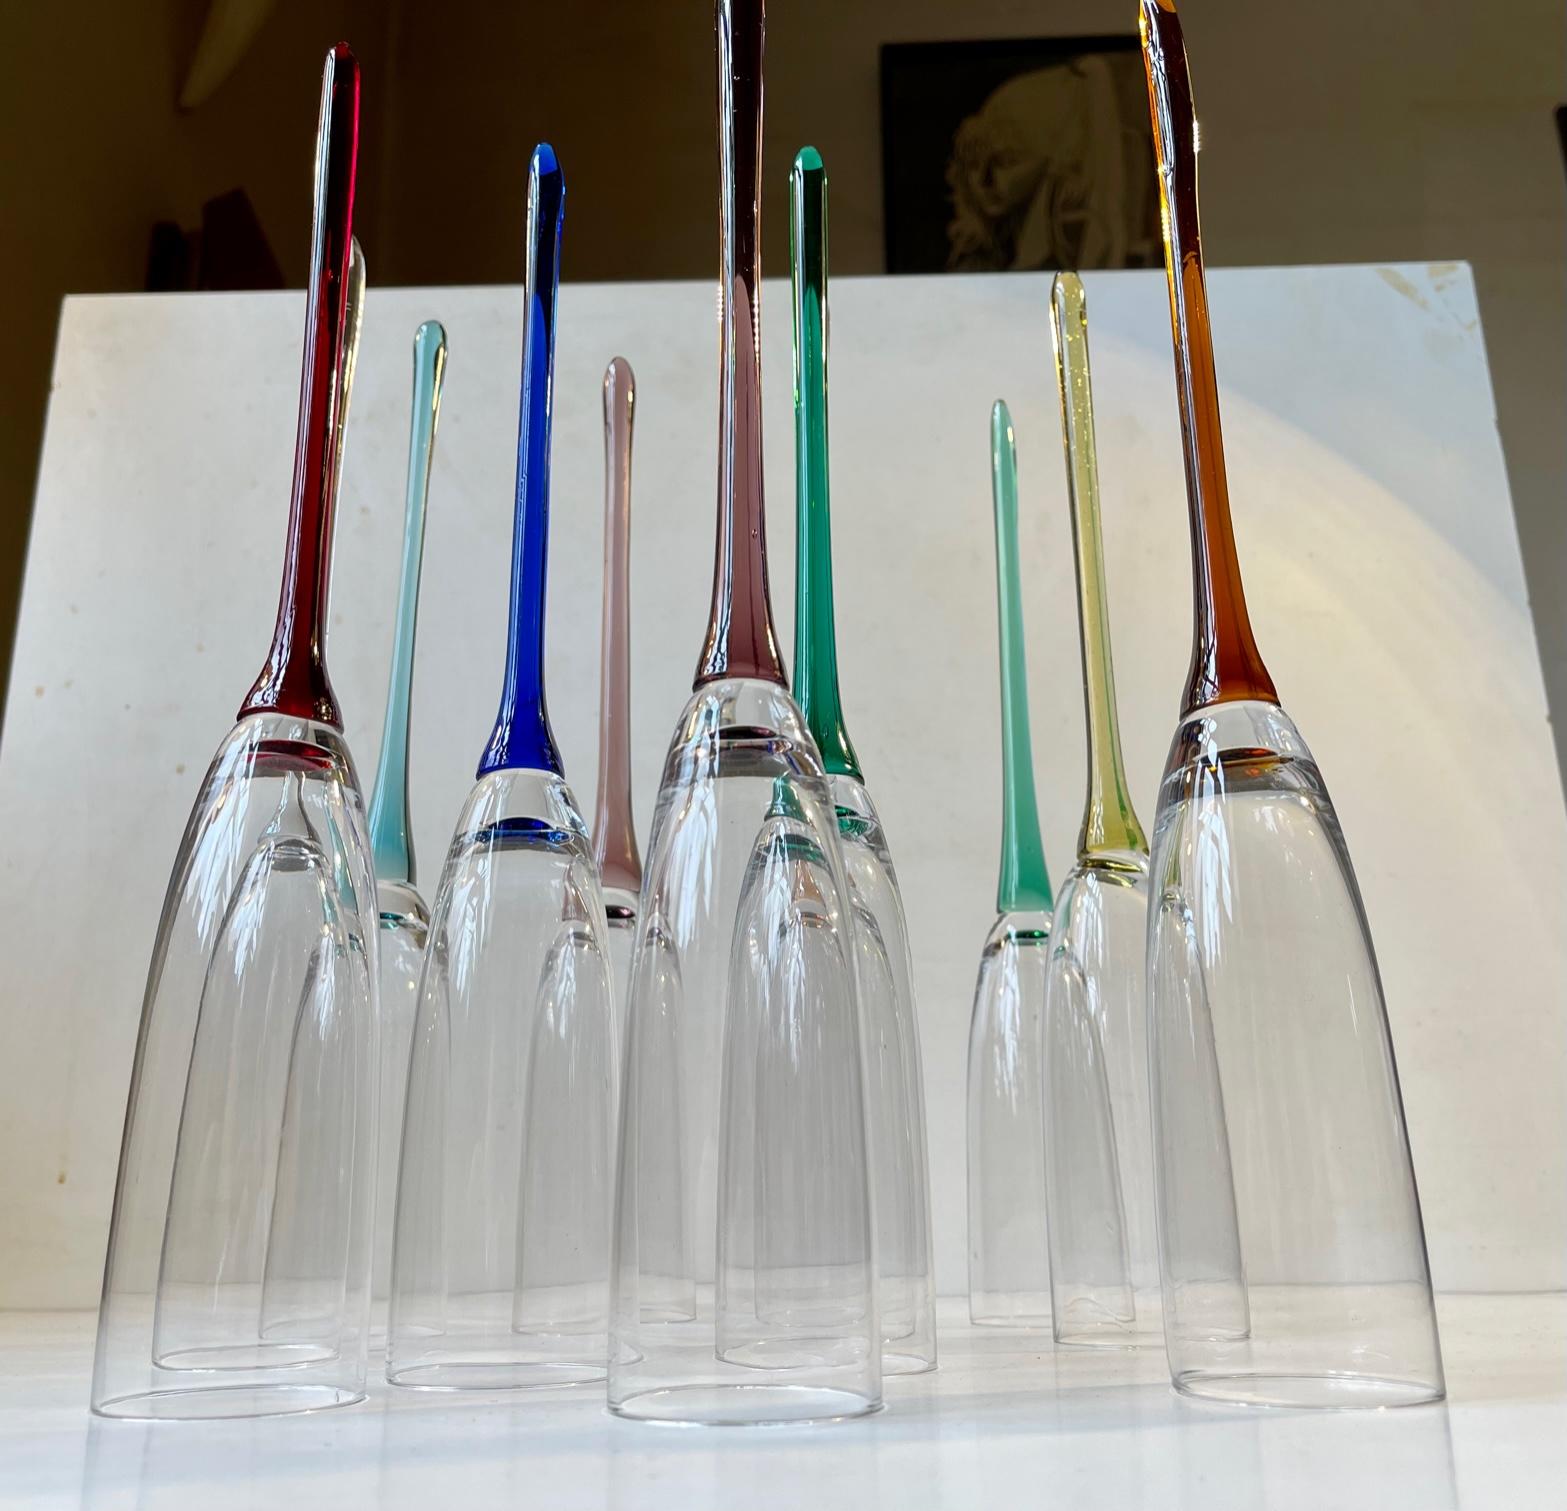 A set of 11 base-less champagne glasses with colored stems. Handmade in Bohemia/Czech Republic circa 1980-90. Measurements: height: 30 cm (slight variation), diameter: 5 cm (top). The price is for the lot - set of 11.